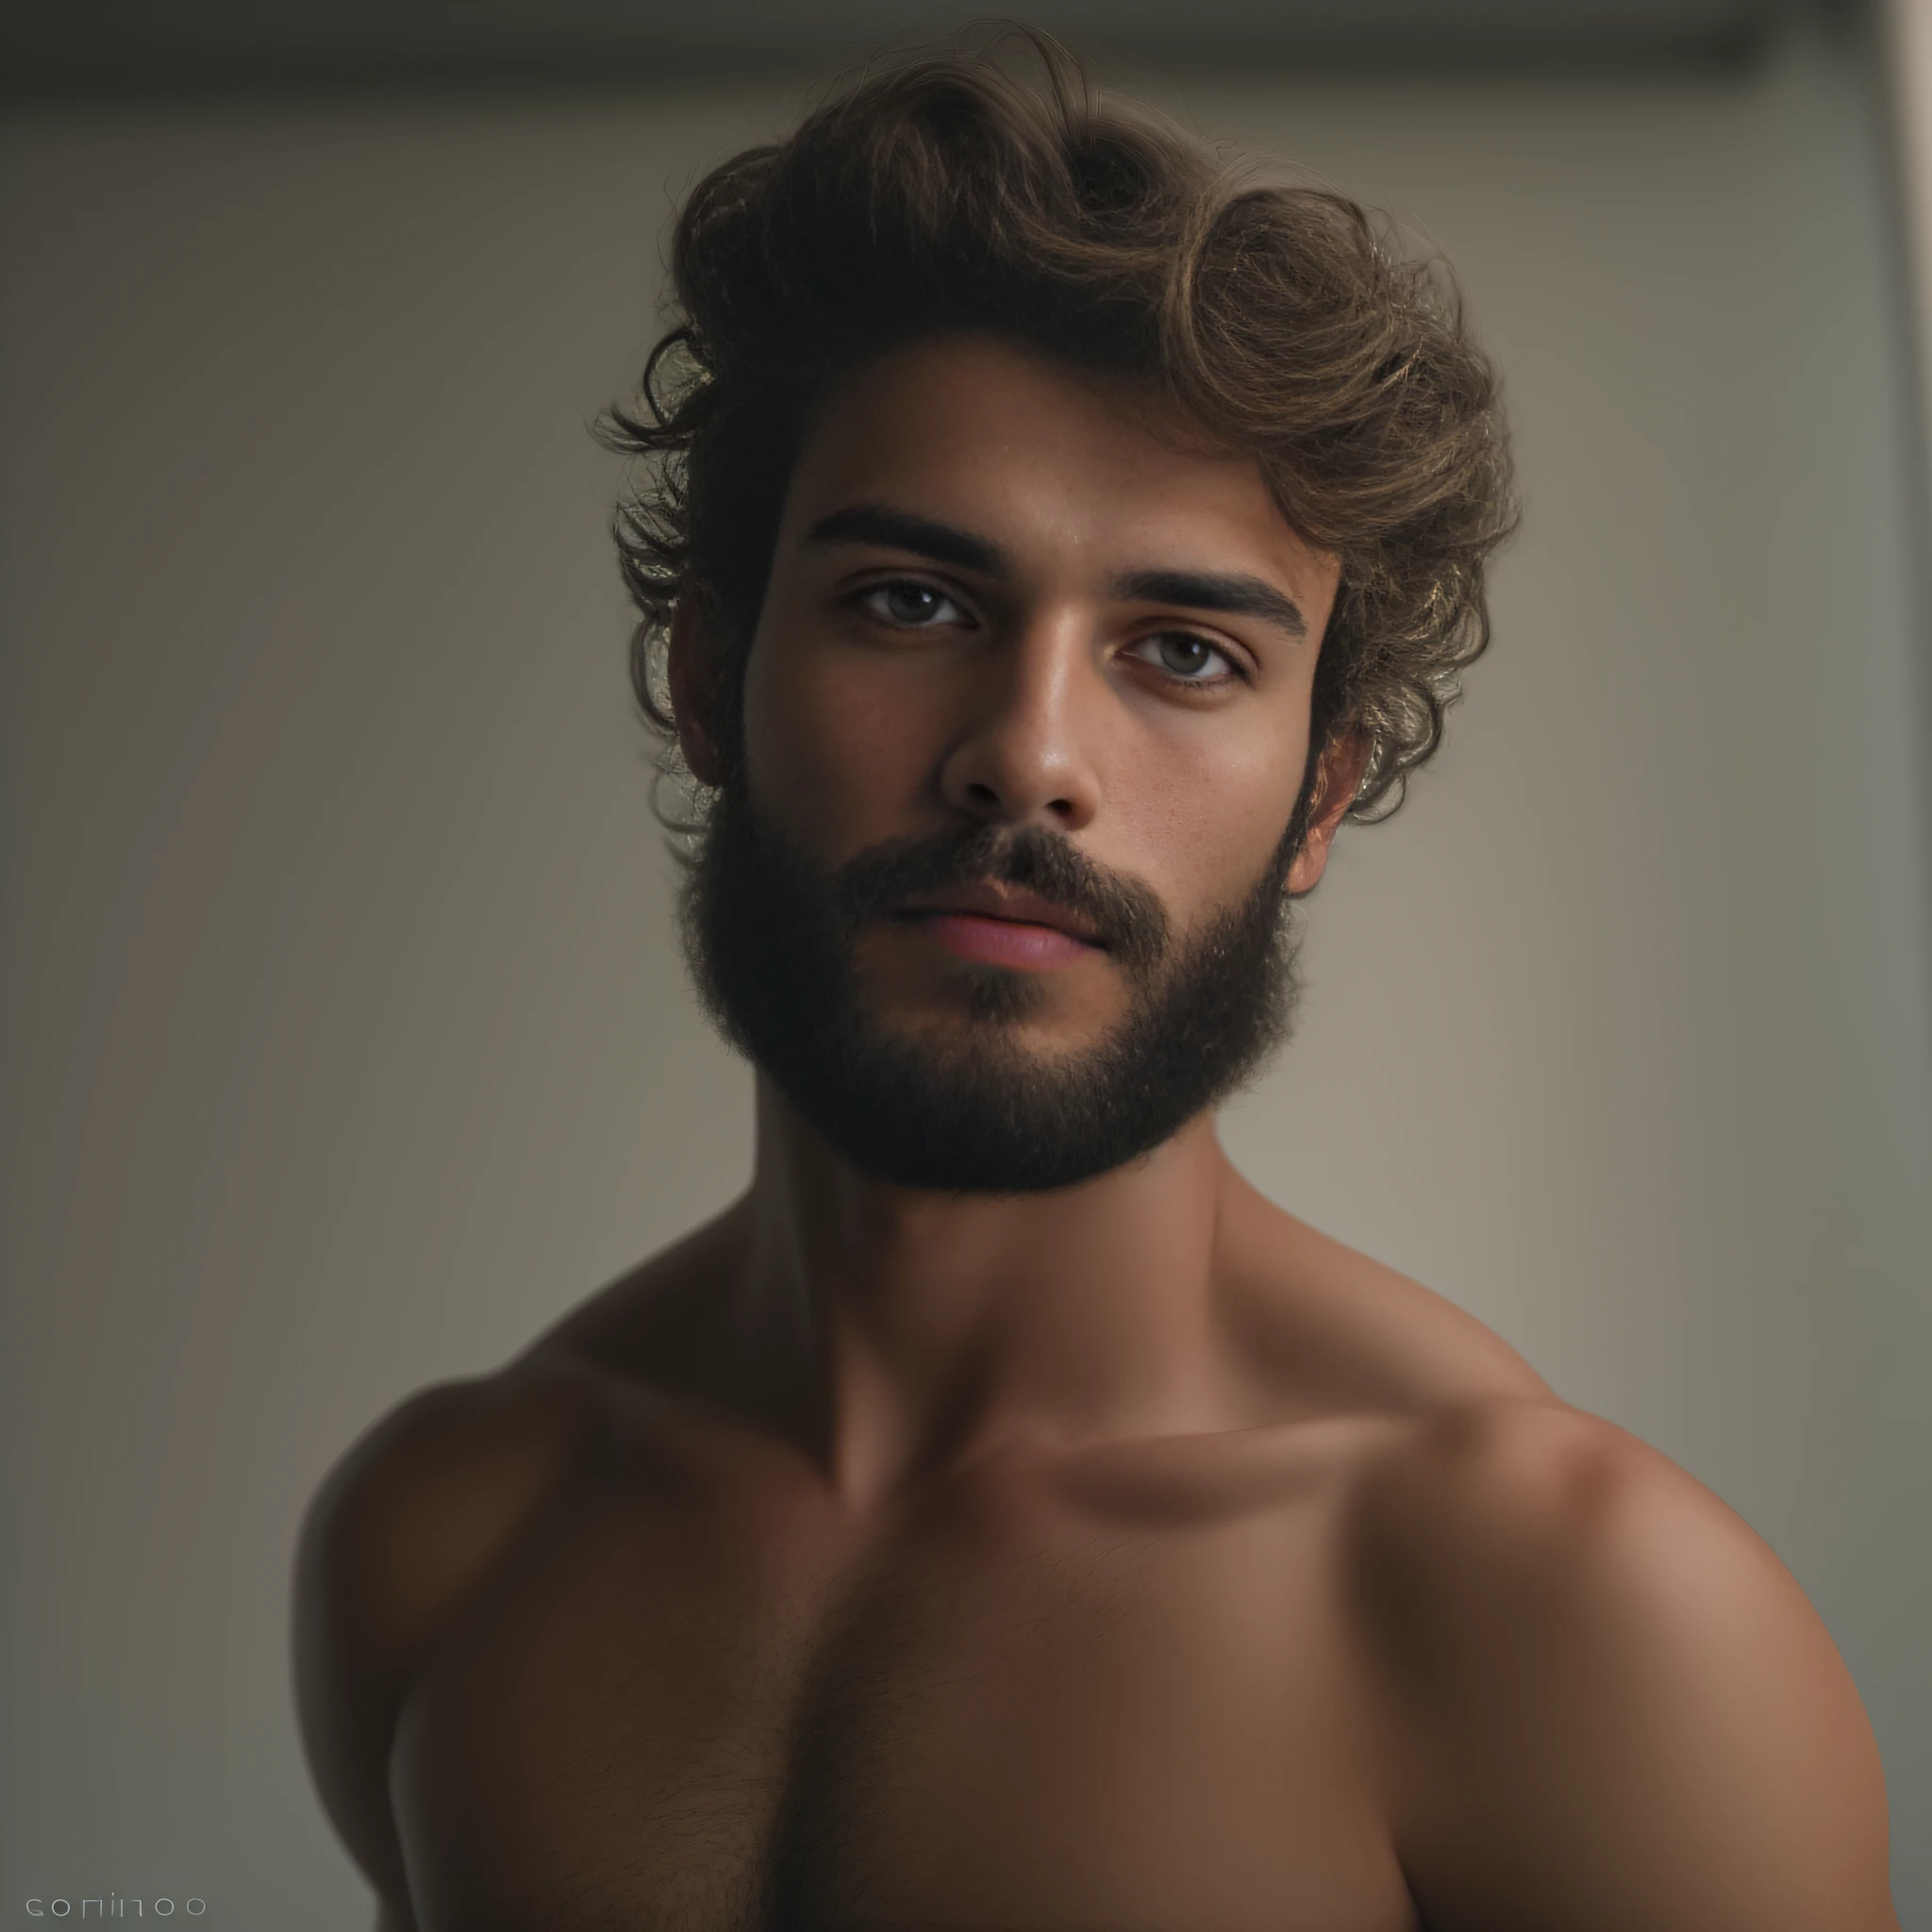 A 23-year-old man from Netherlands, masculine, bearded, full beard, role model, fully body, Very beauthful, looking-into-camera, detailled image, uhd, 8K, well-lit, grain of film, perfect  lighting